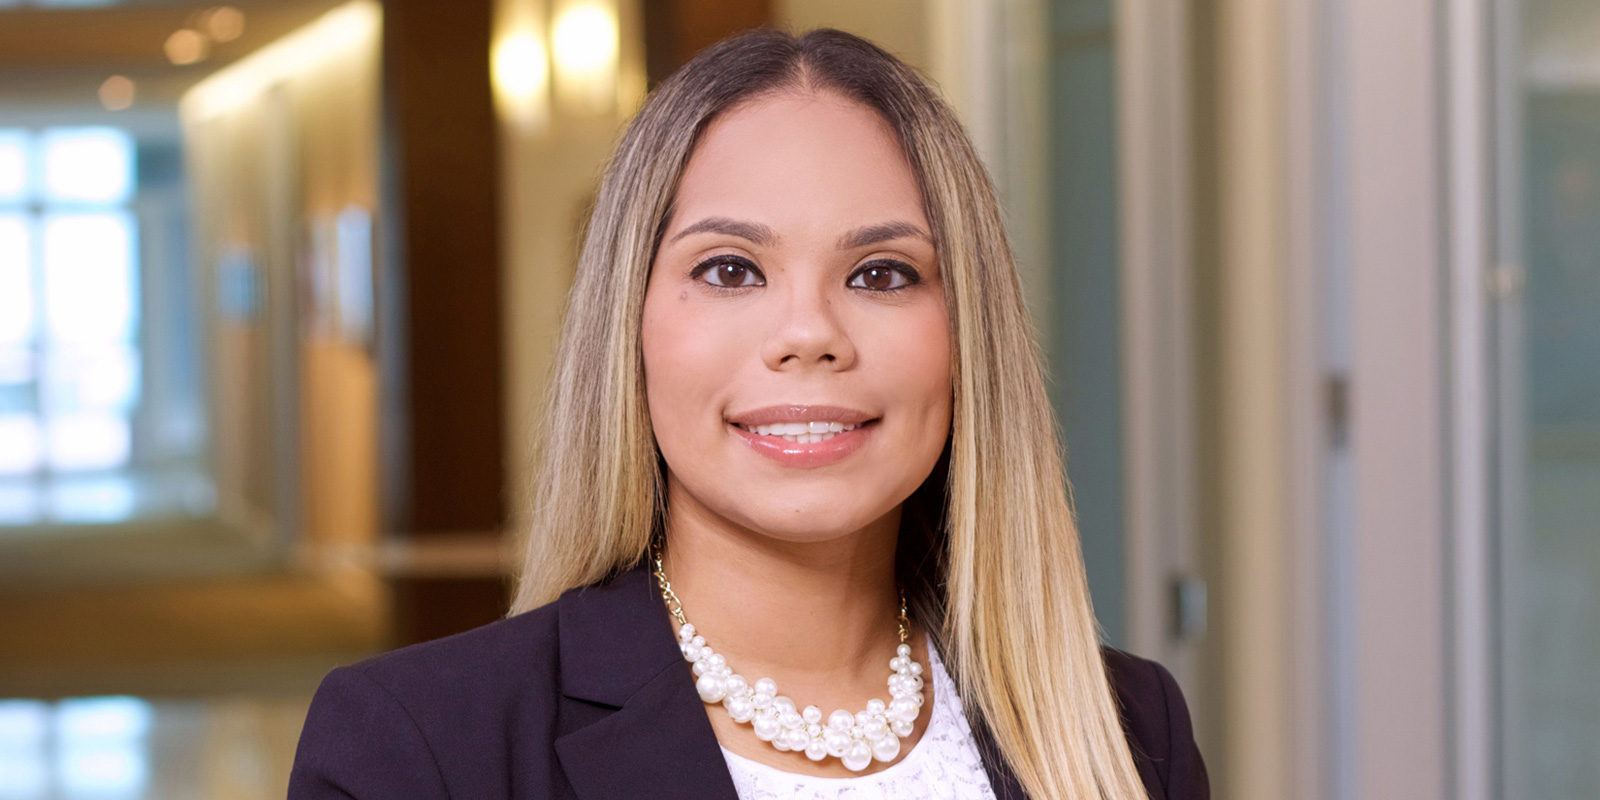 Ciera Marie Colon recognized in the 2022 Lawyers of Color Annual Hot